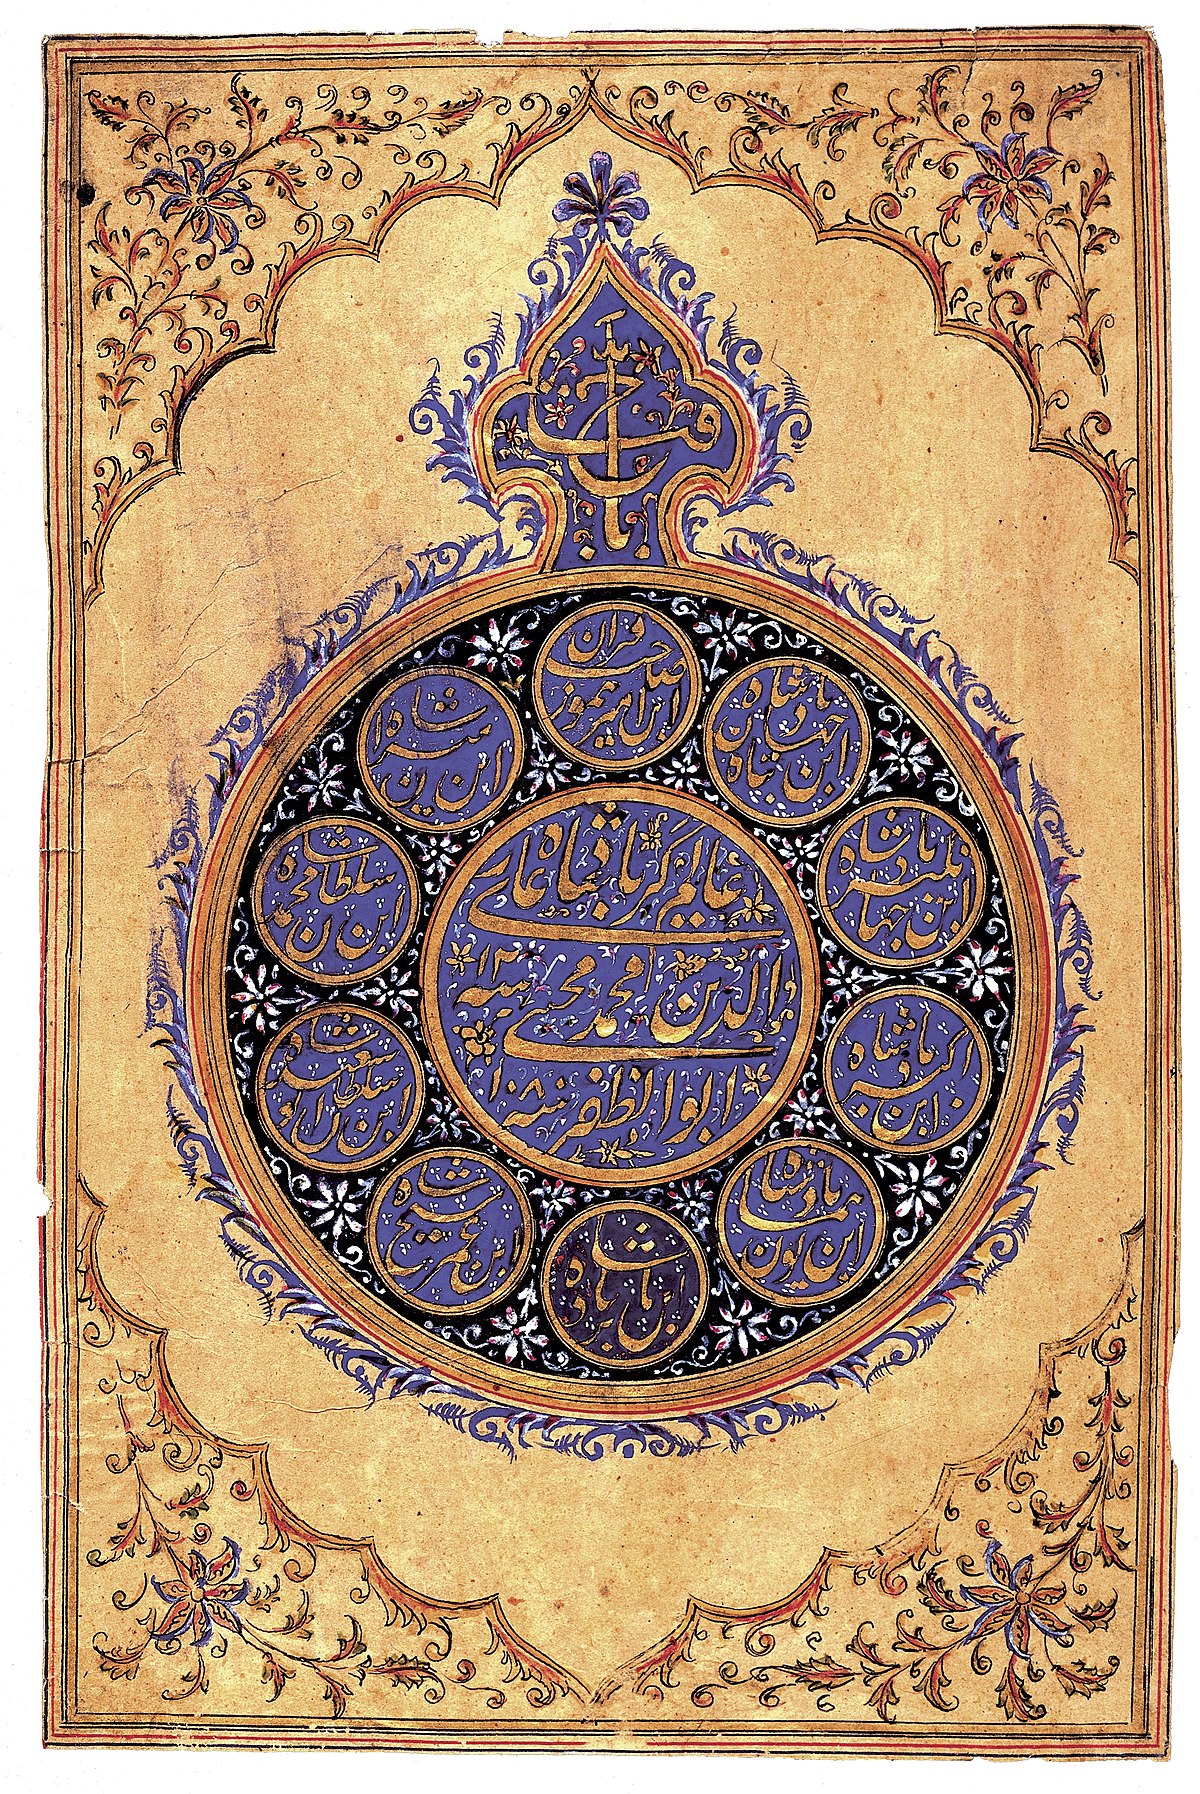 1200px-Painted_seal_of_Mughal_Emperor_Awrangzib_Wellcome_L0034099